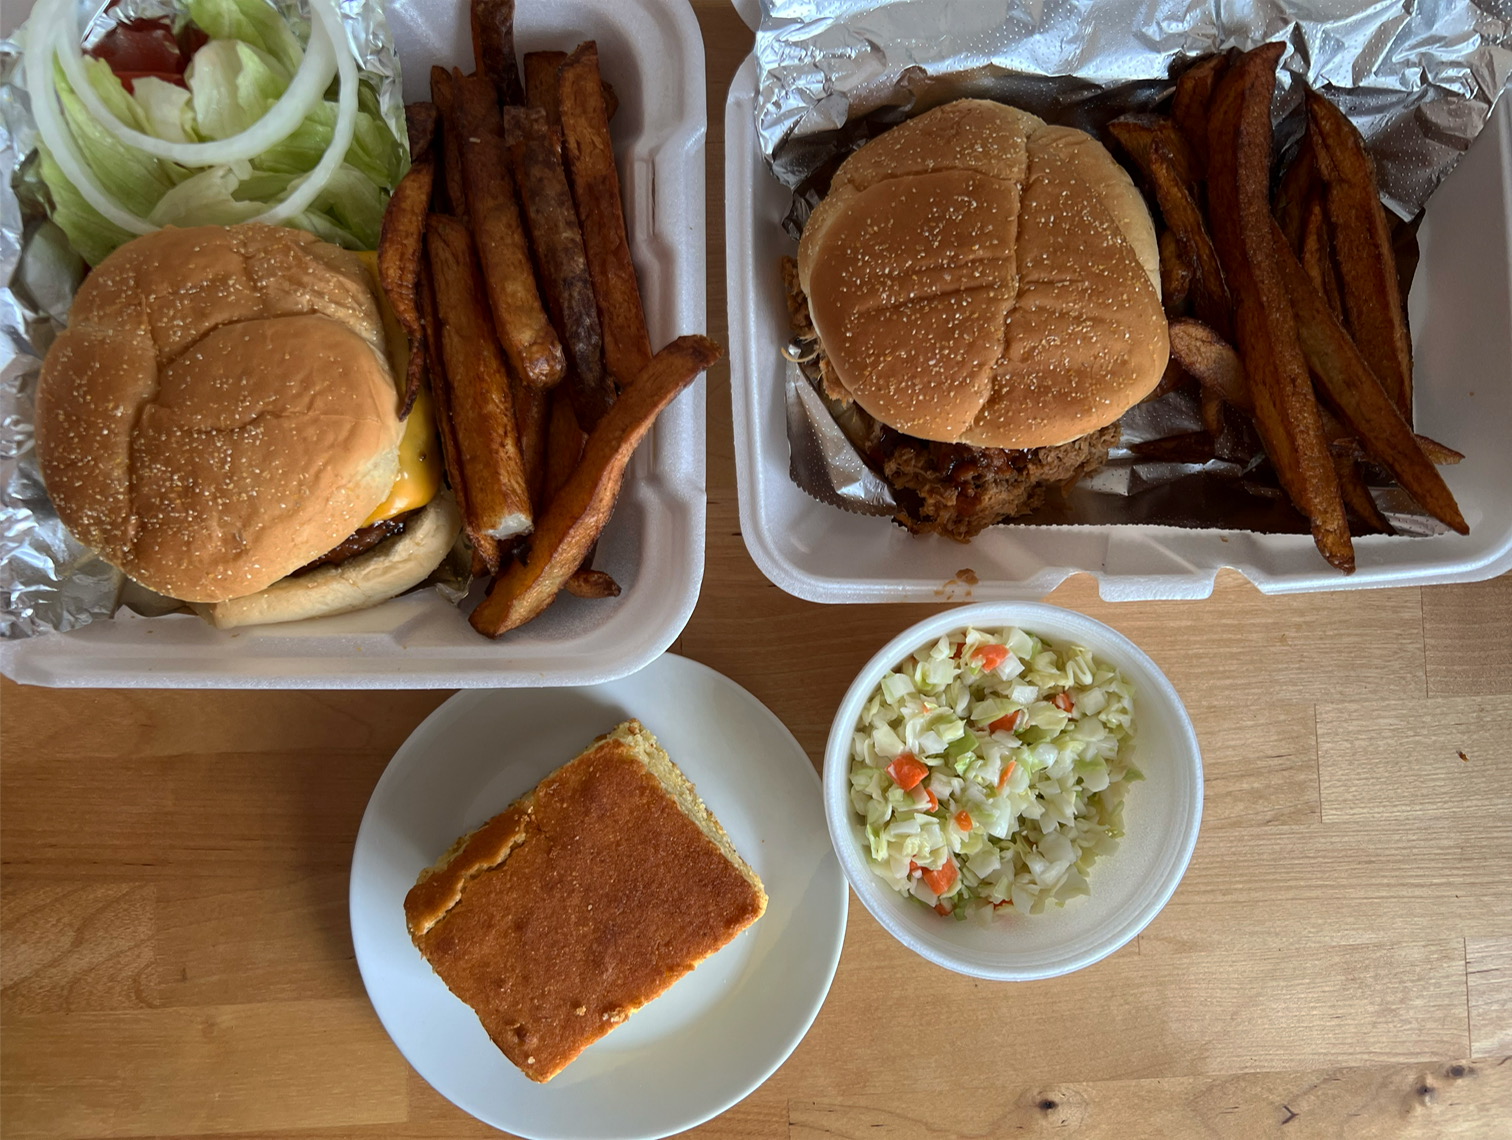 On a wooden table, there is a takeout order of burger, pulled pork, coleslaw, and cornbread. Photo by Alyssa Buckley.